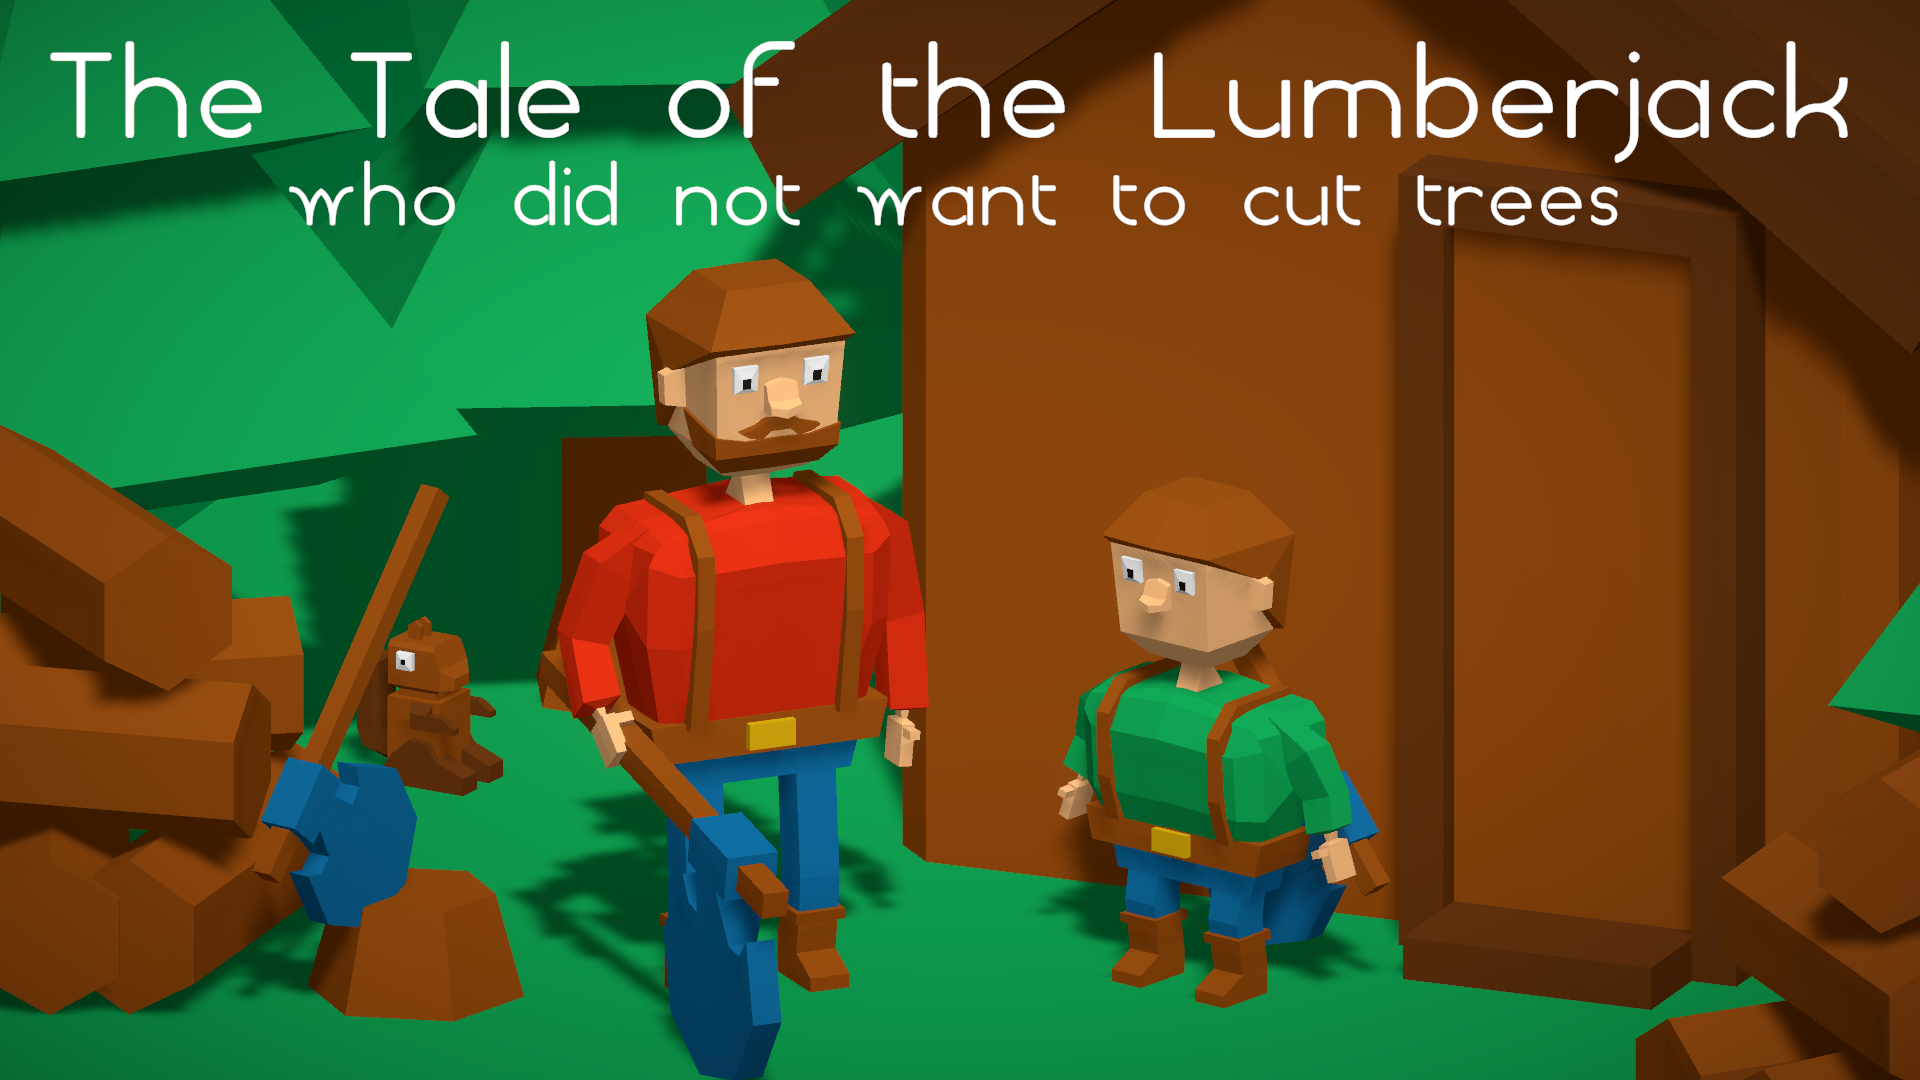 The Tale of the Lumberjack who did not want to cut trees